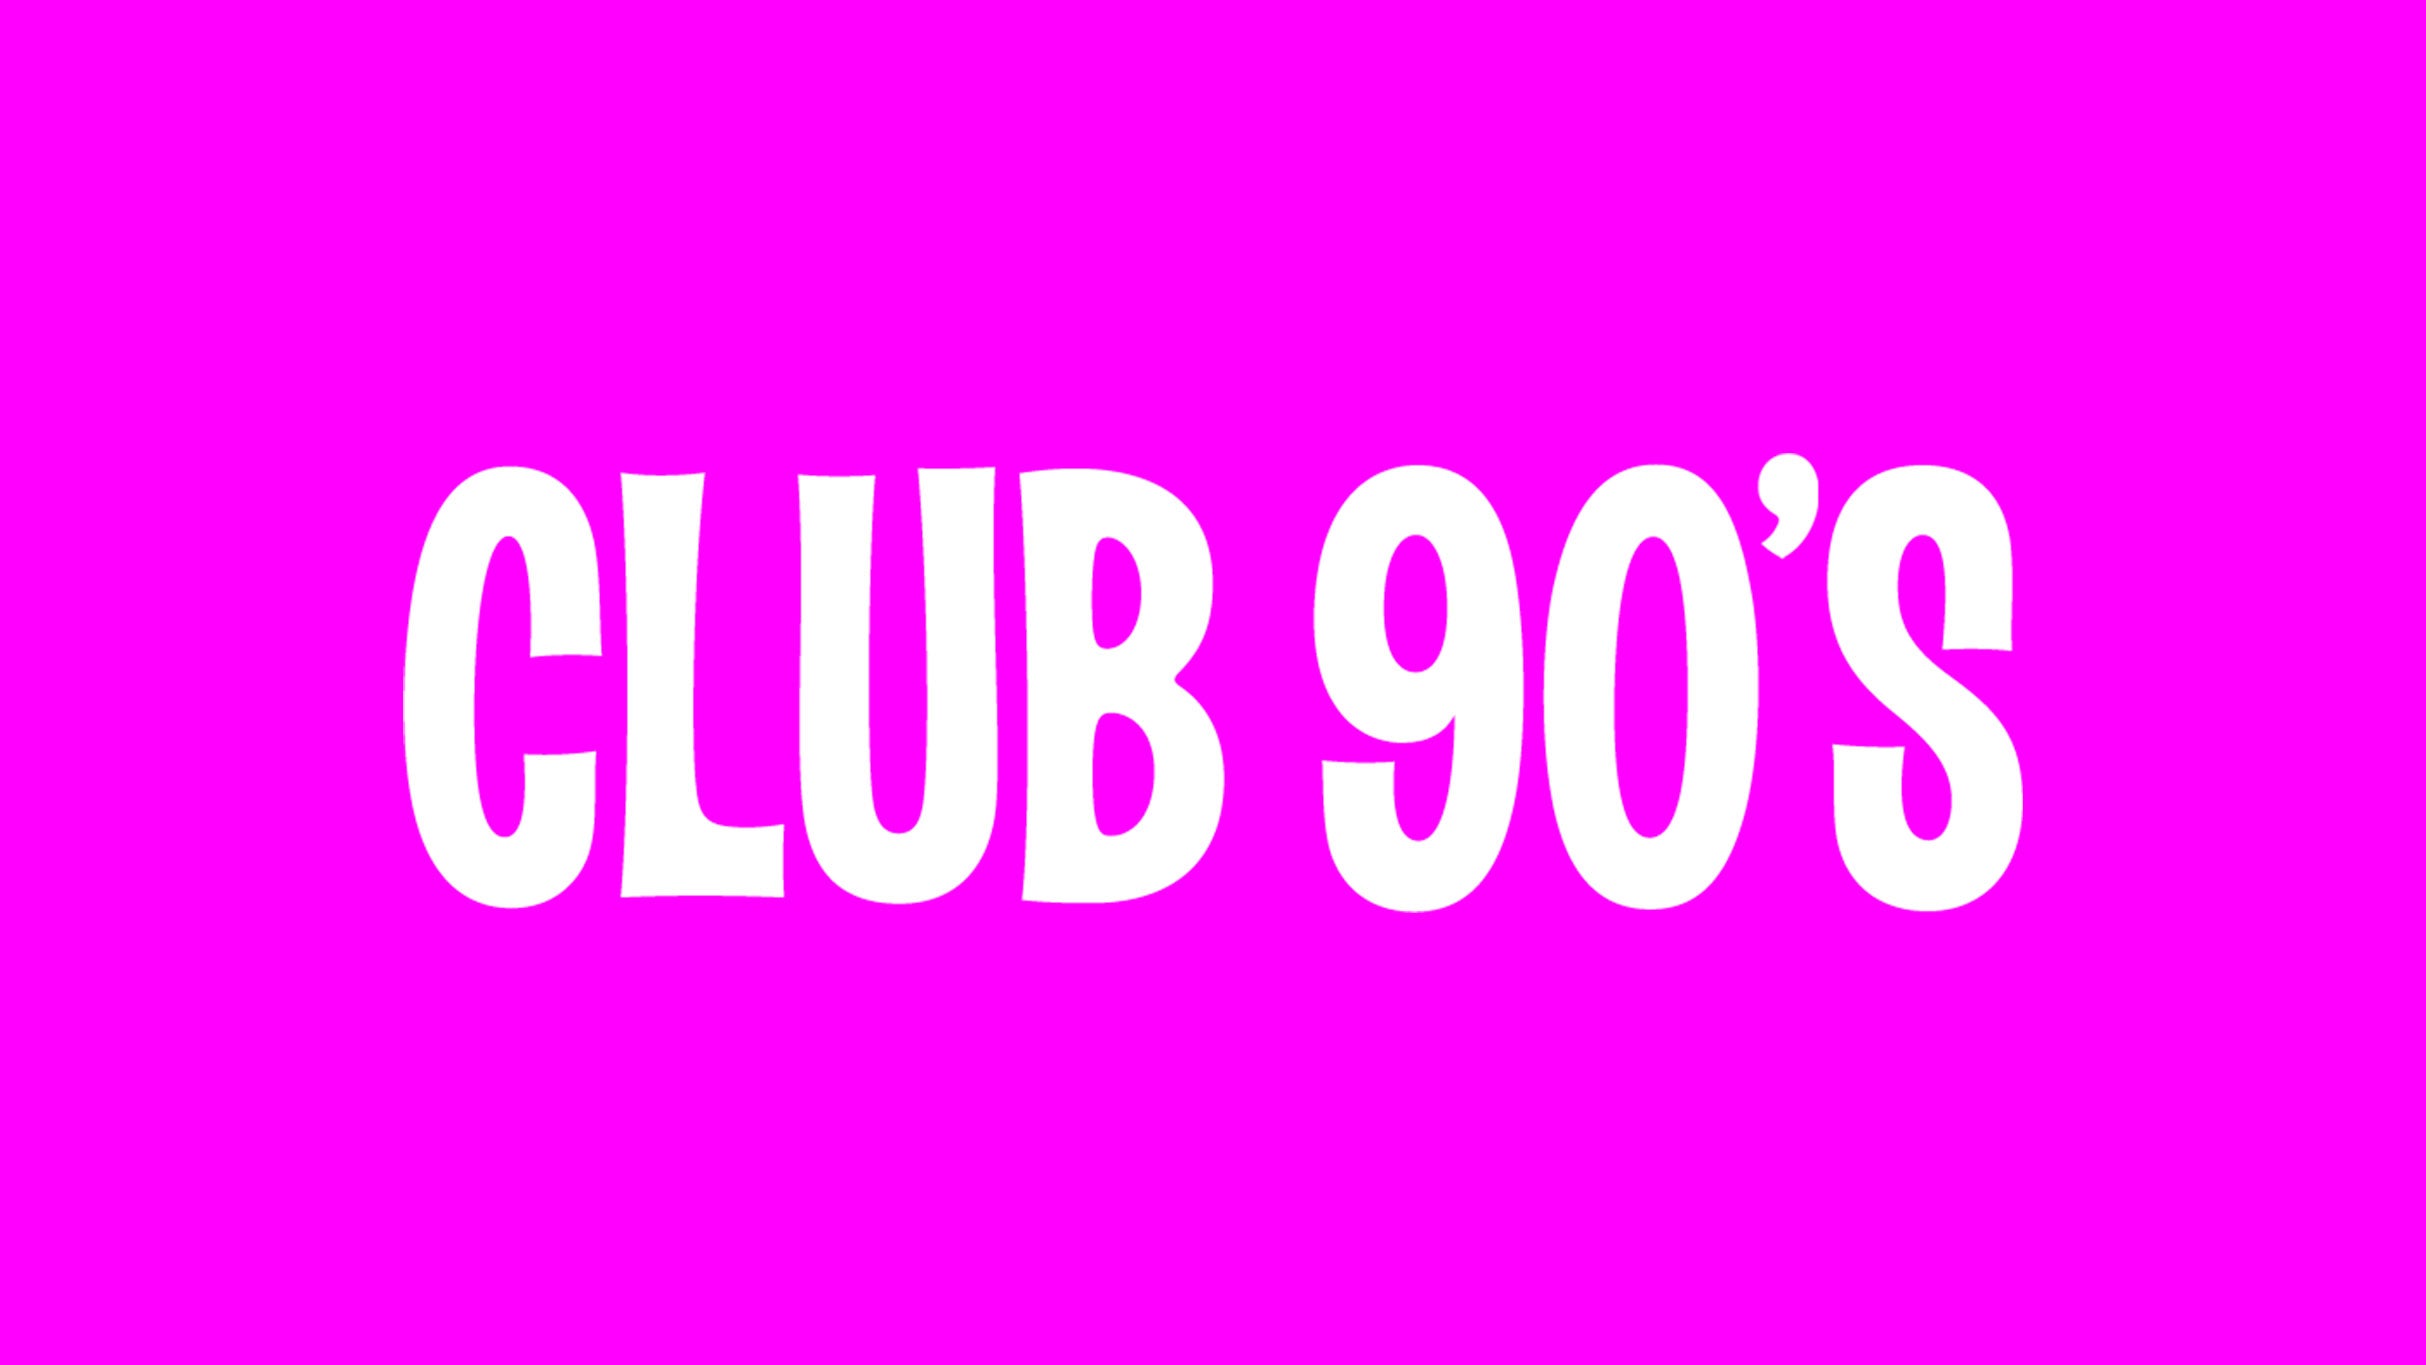 Club 90s Present Justin Bieber Night free presale password for early tickets in Chicago